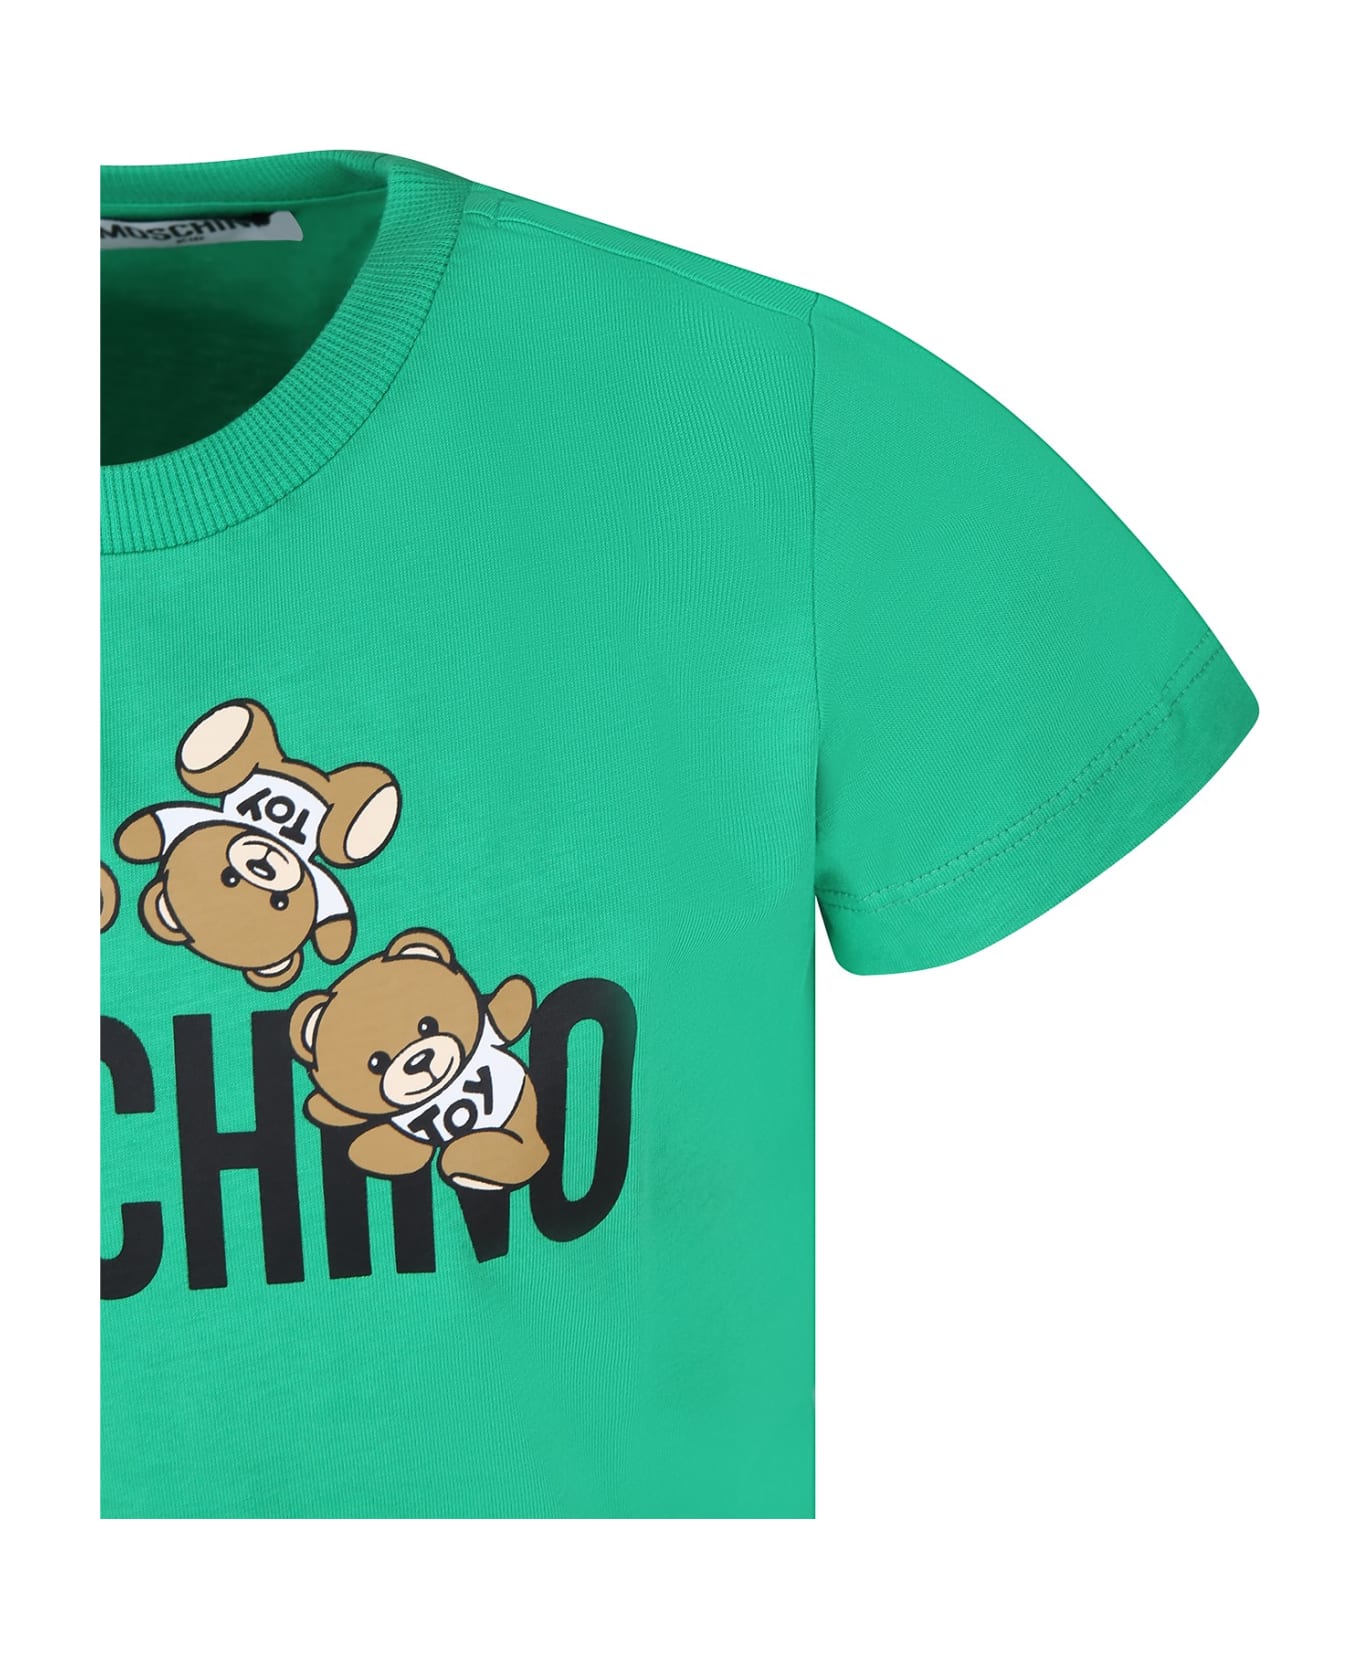 Moschino Green T-shirt For Kids With Teddy Bears And Logo - Green